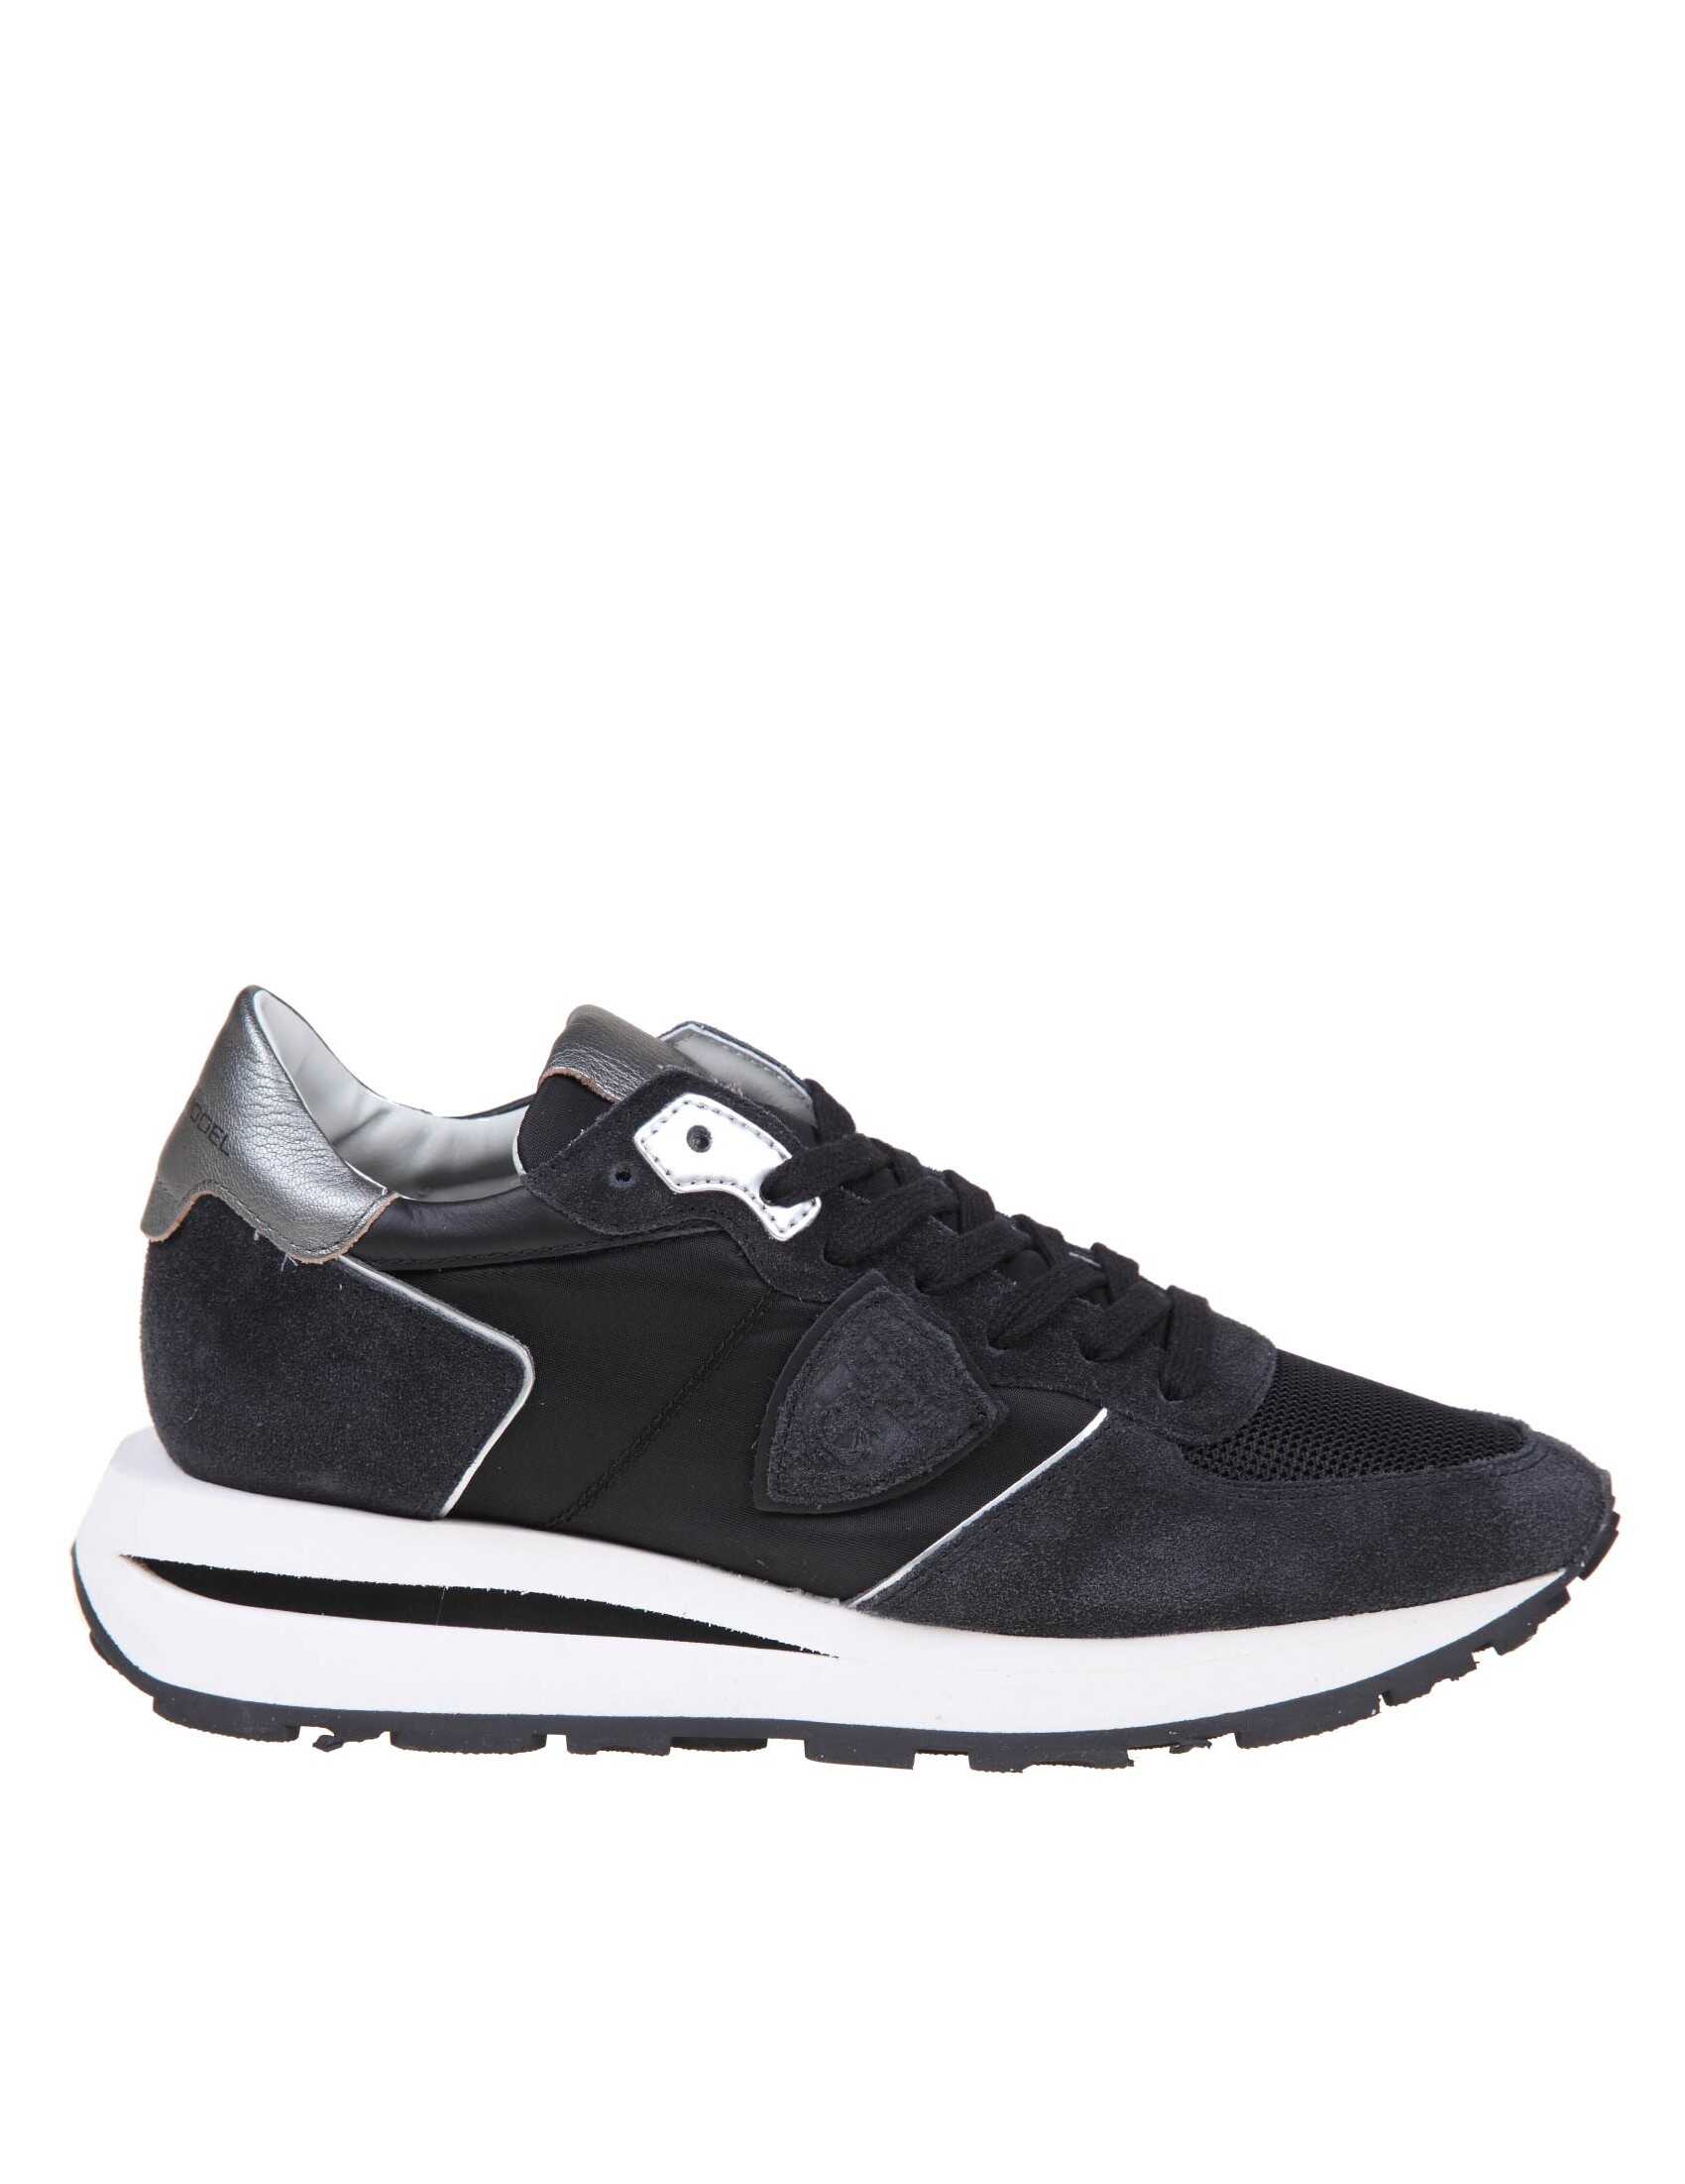 Philippe Model Philippe model tres temple sneakers in black suede Black